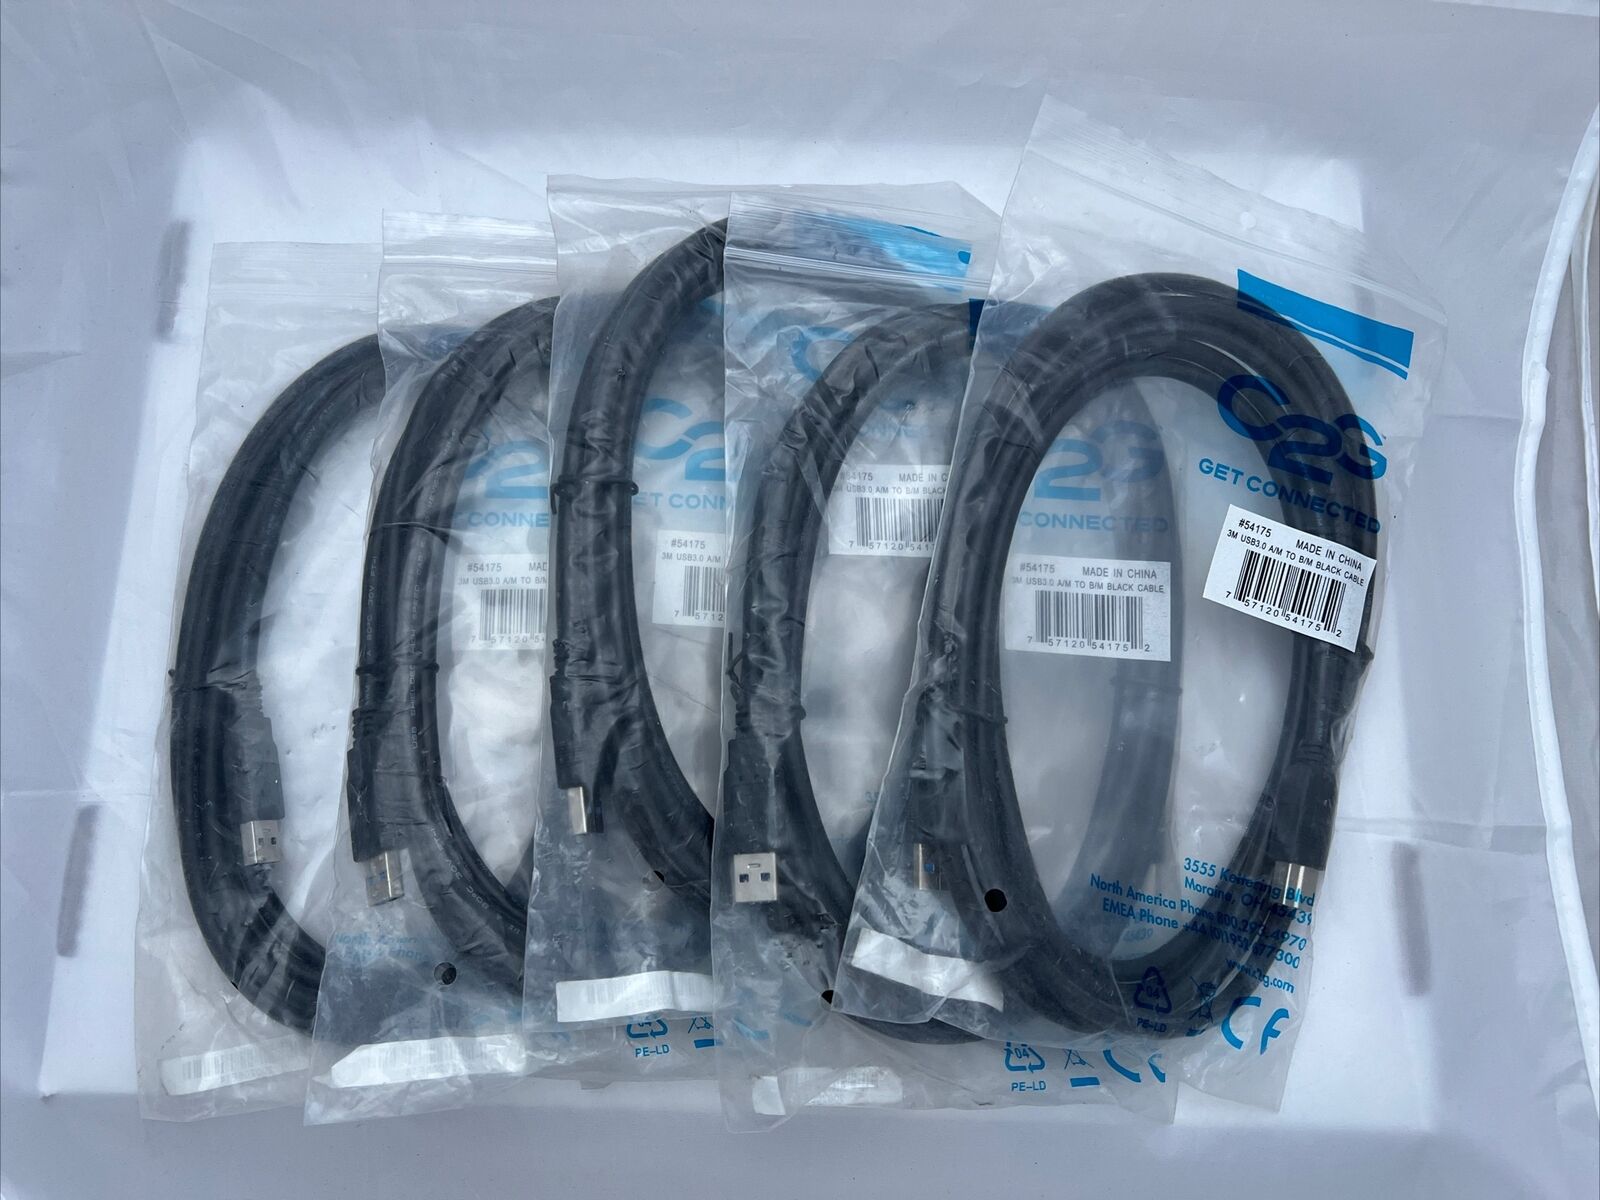 Lot 5X - Cables To GO USB 3.0 A Male to A Male Cable, Blk  #54175